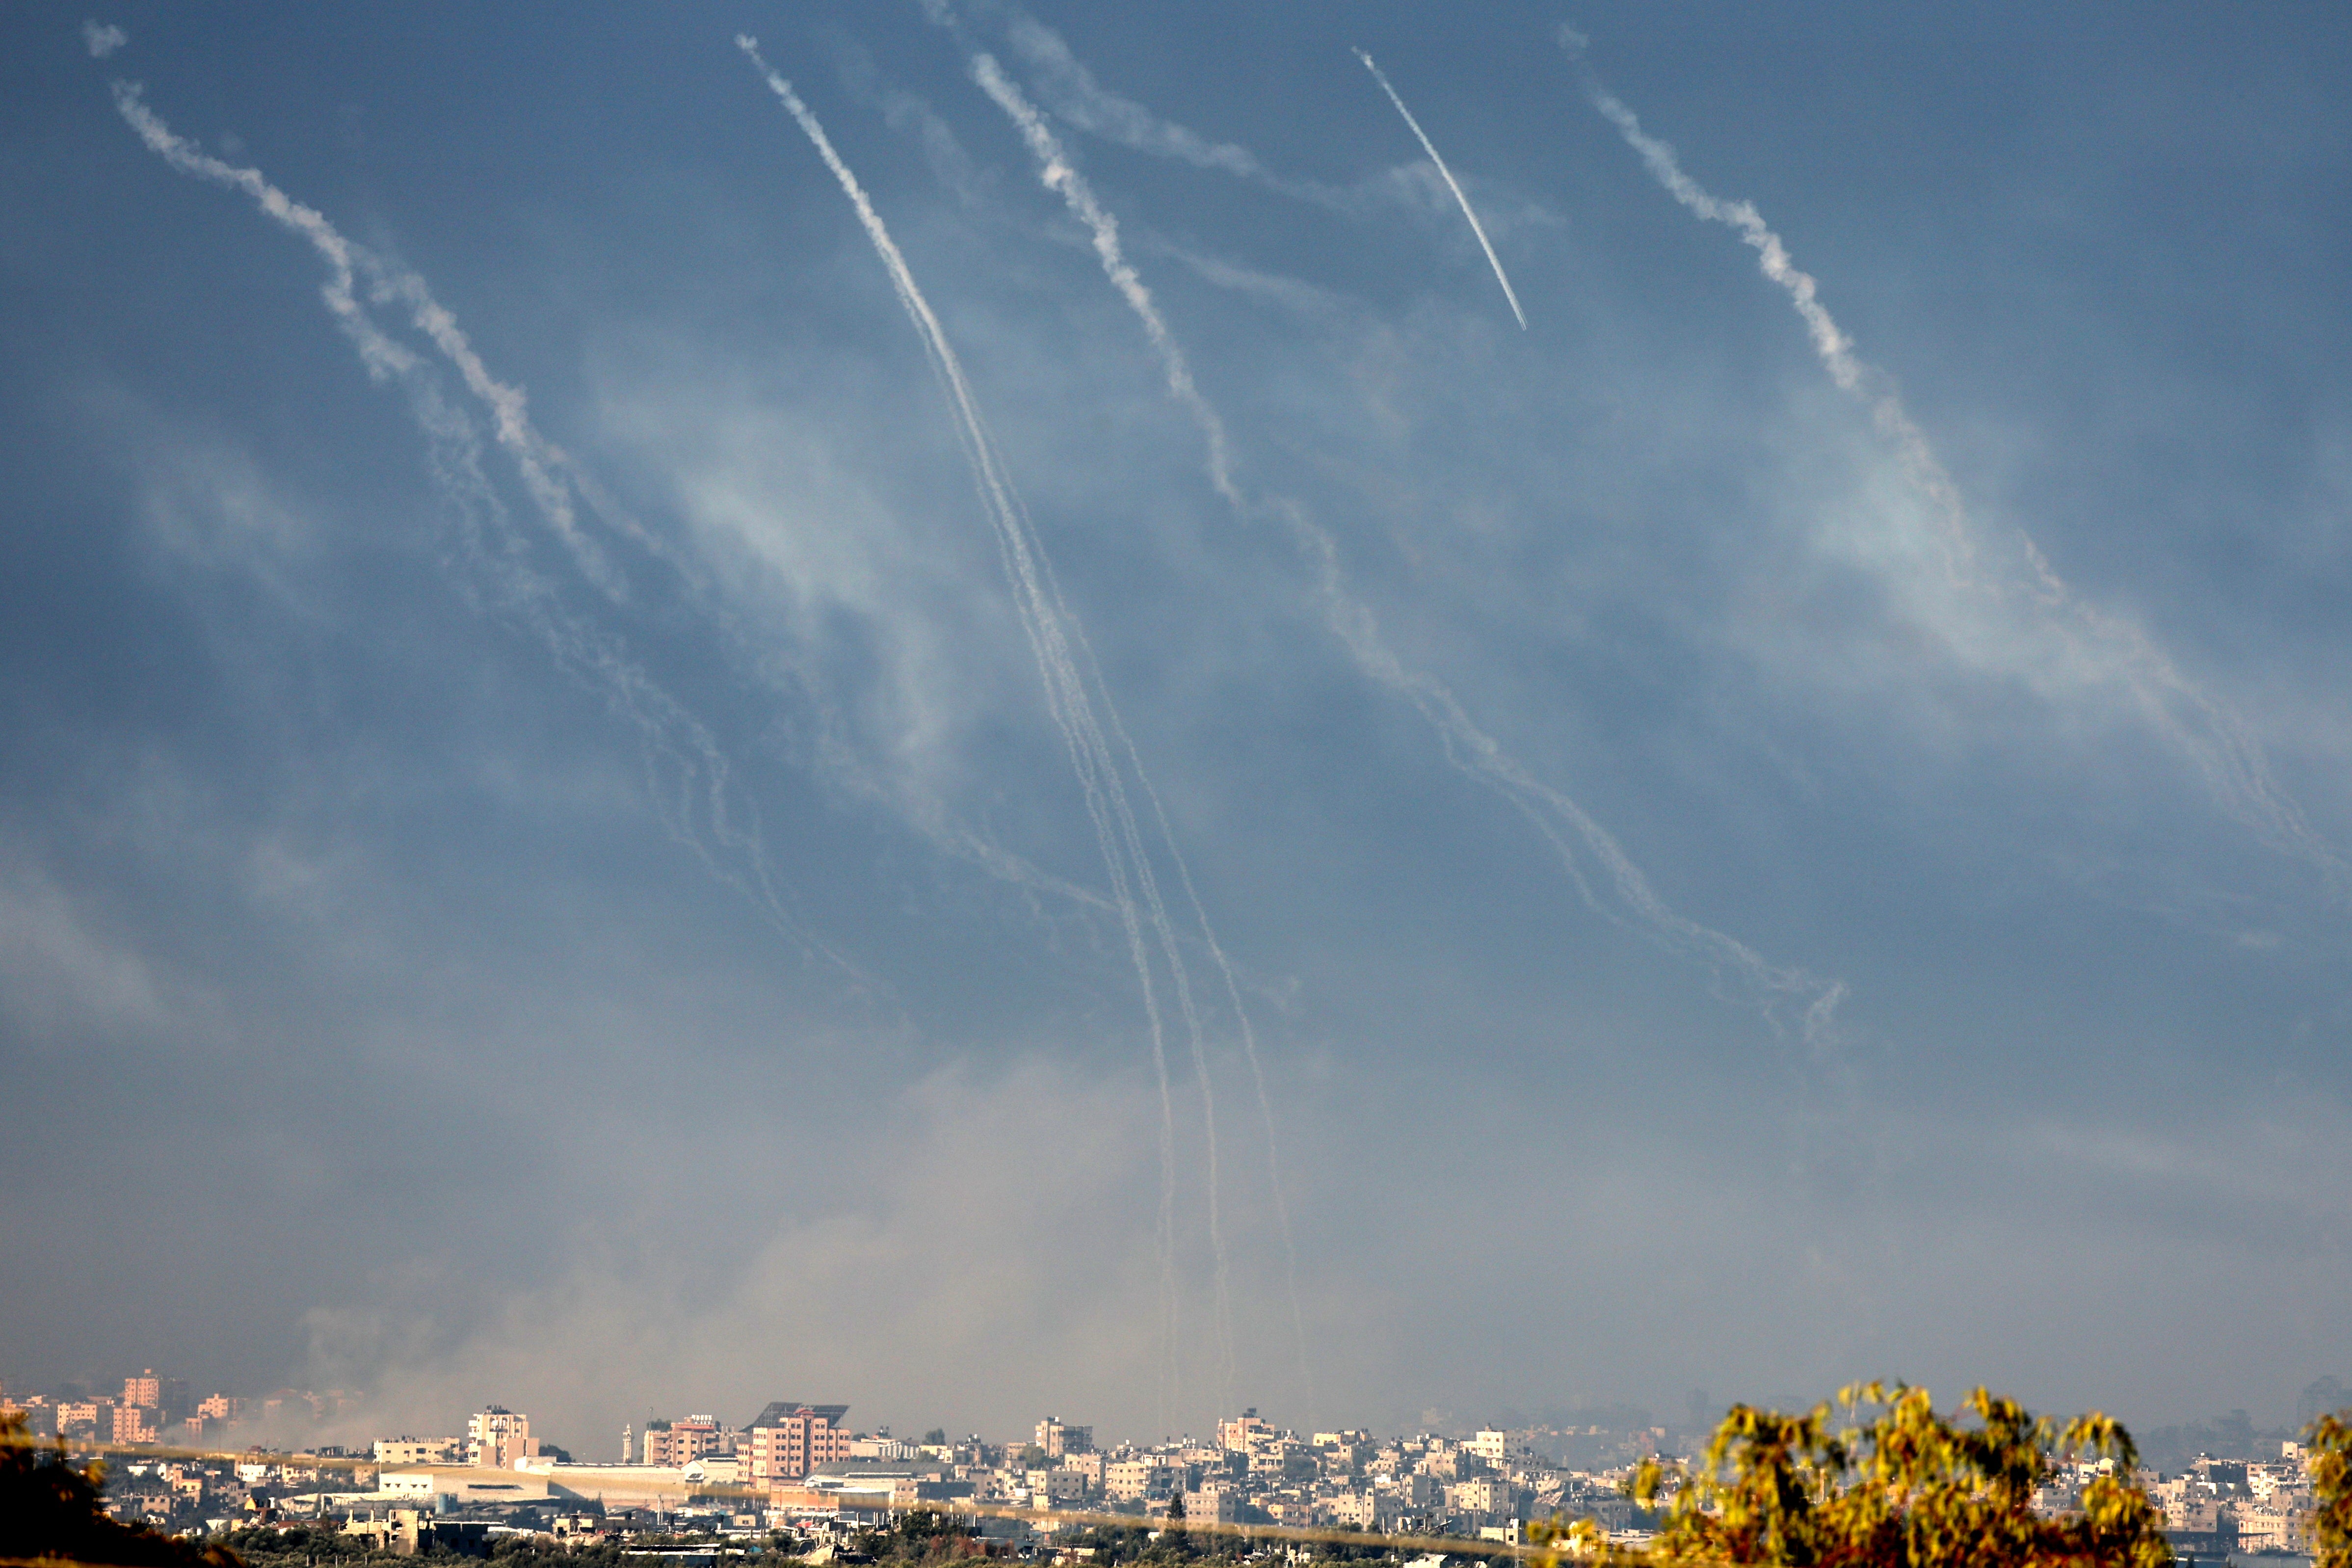 Artillery shelling by the Israeli army towards the Jabaliya refugee camp is seen on Friday